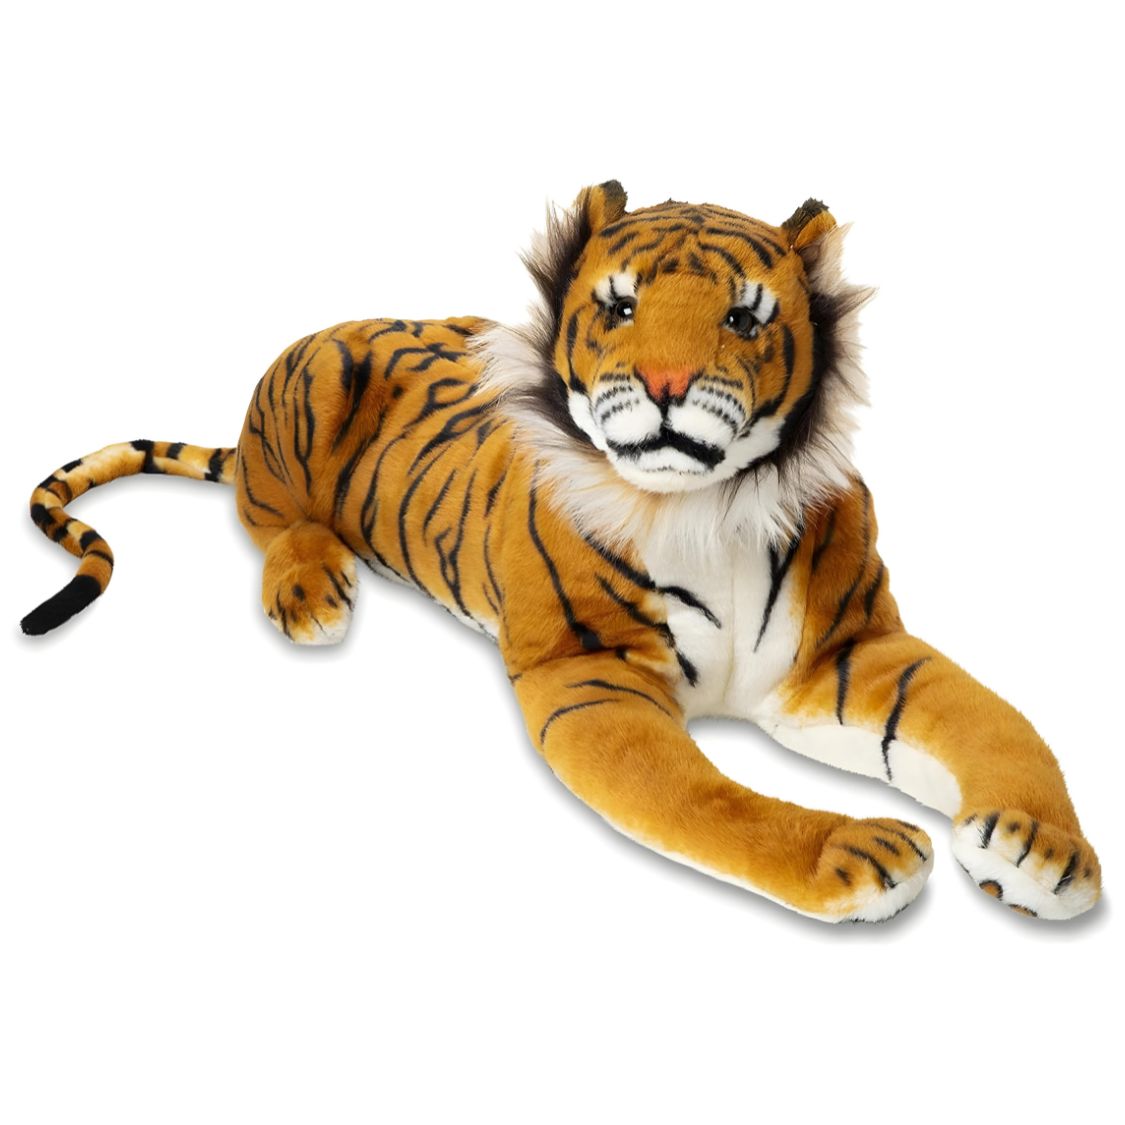 Giant Tiger Party Prop Animal